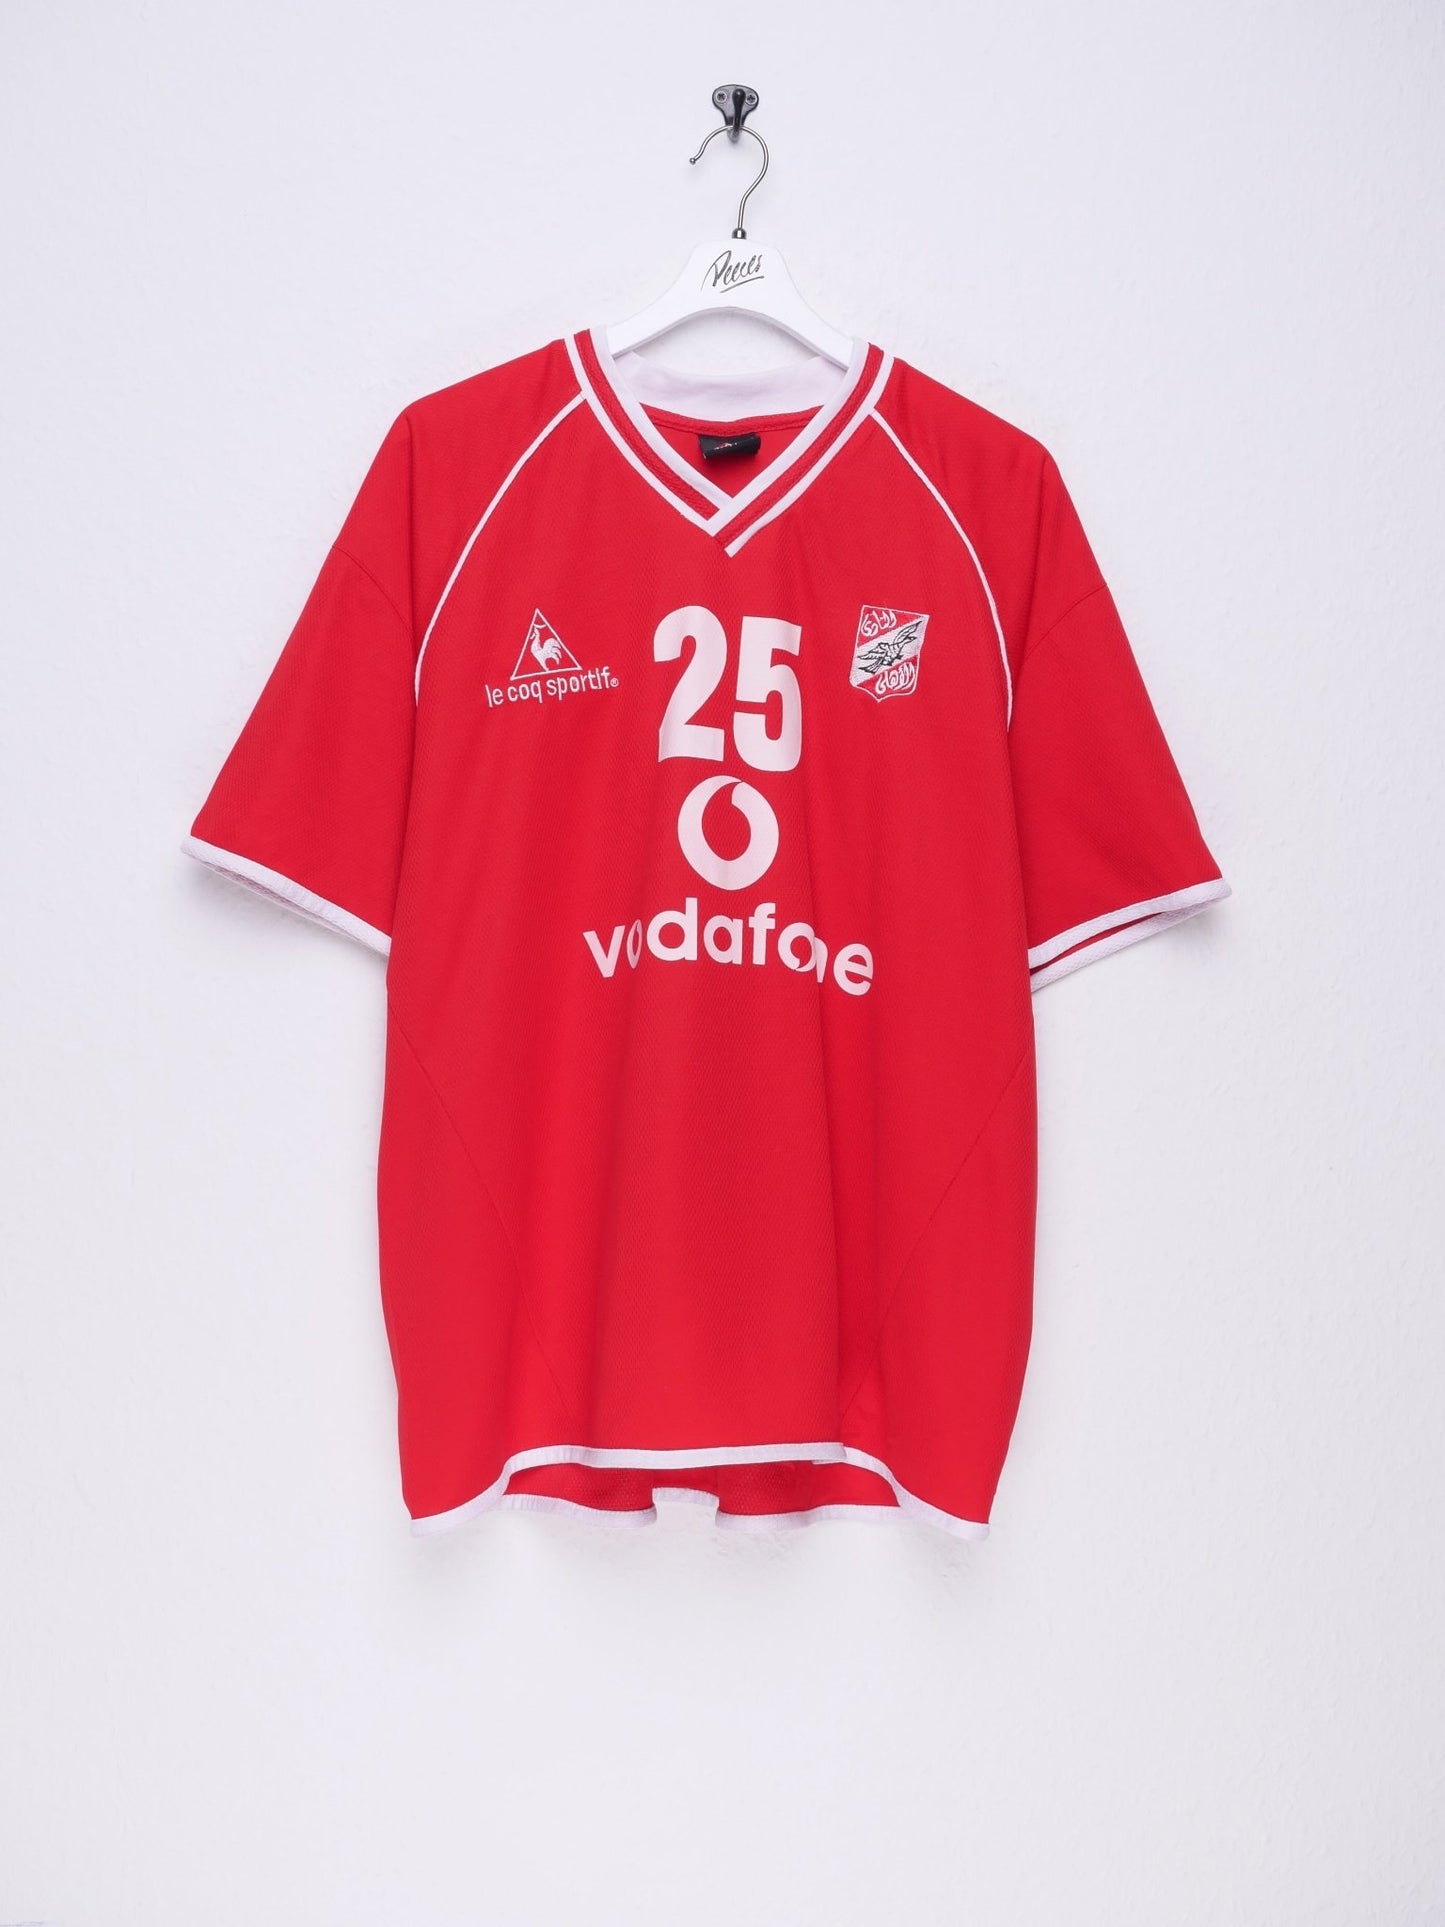 'Le Coq Sportif' embroidered Logo red Jersey Shirt - Peeces